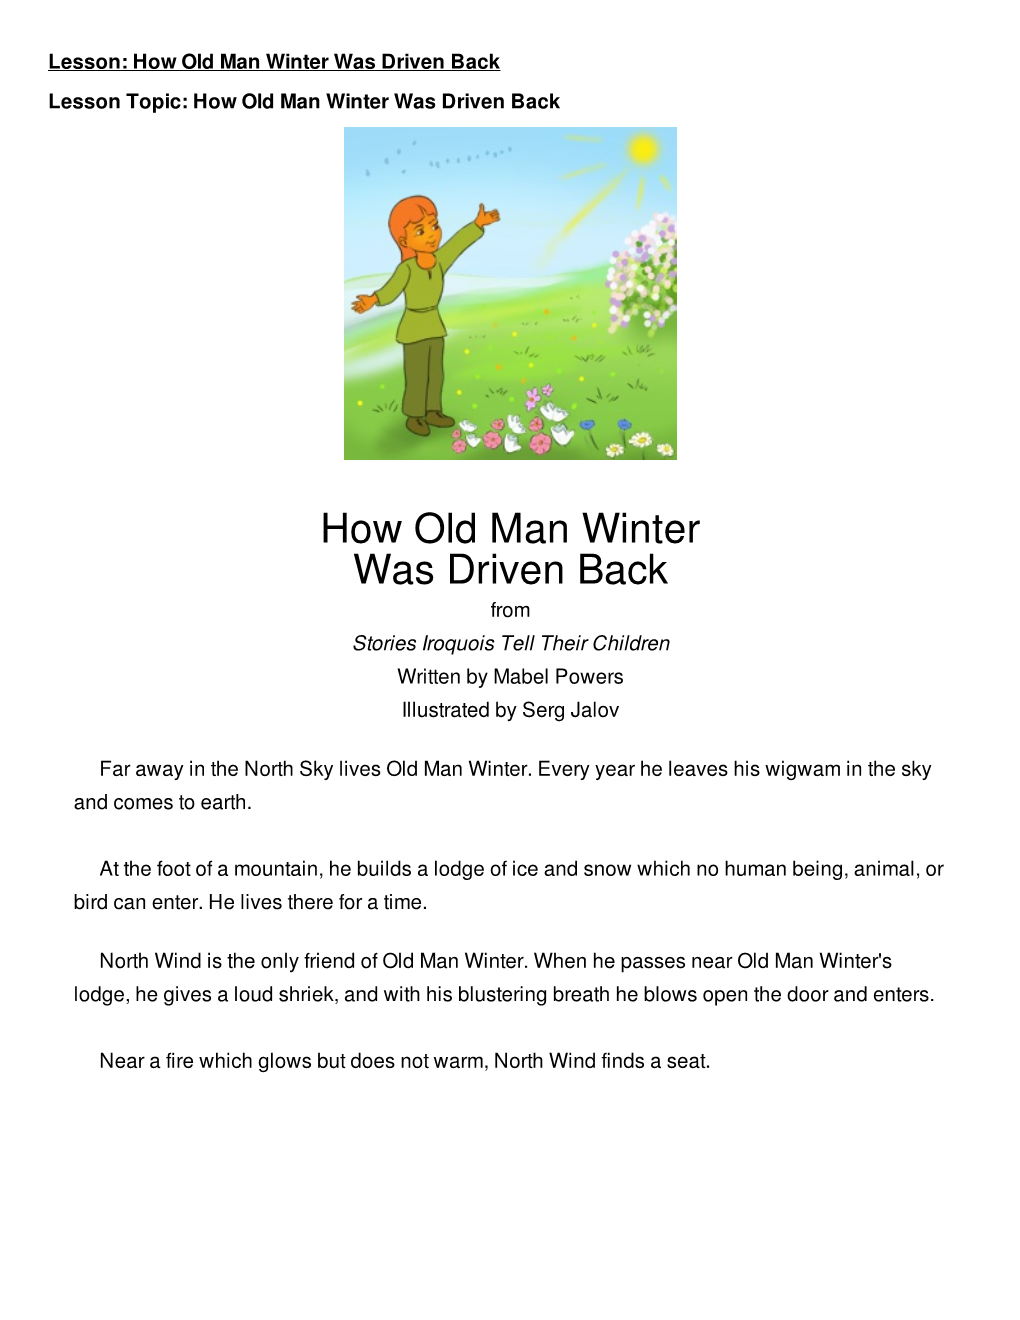 How Old Man Winter Was Driven Back Lesson Topic: How Old Man Winter Was Driven Back